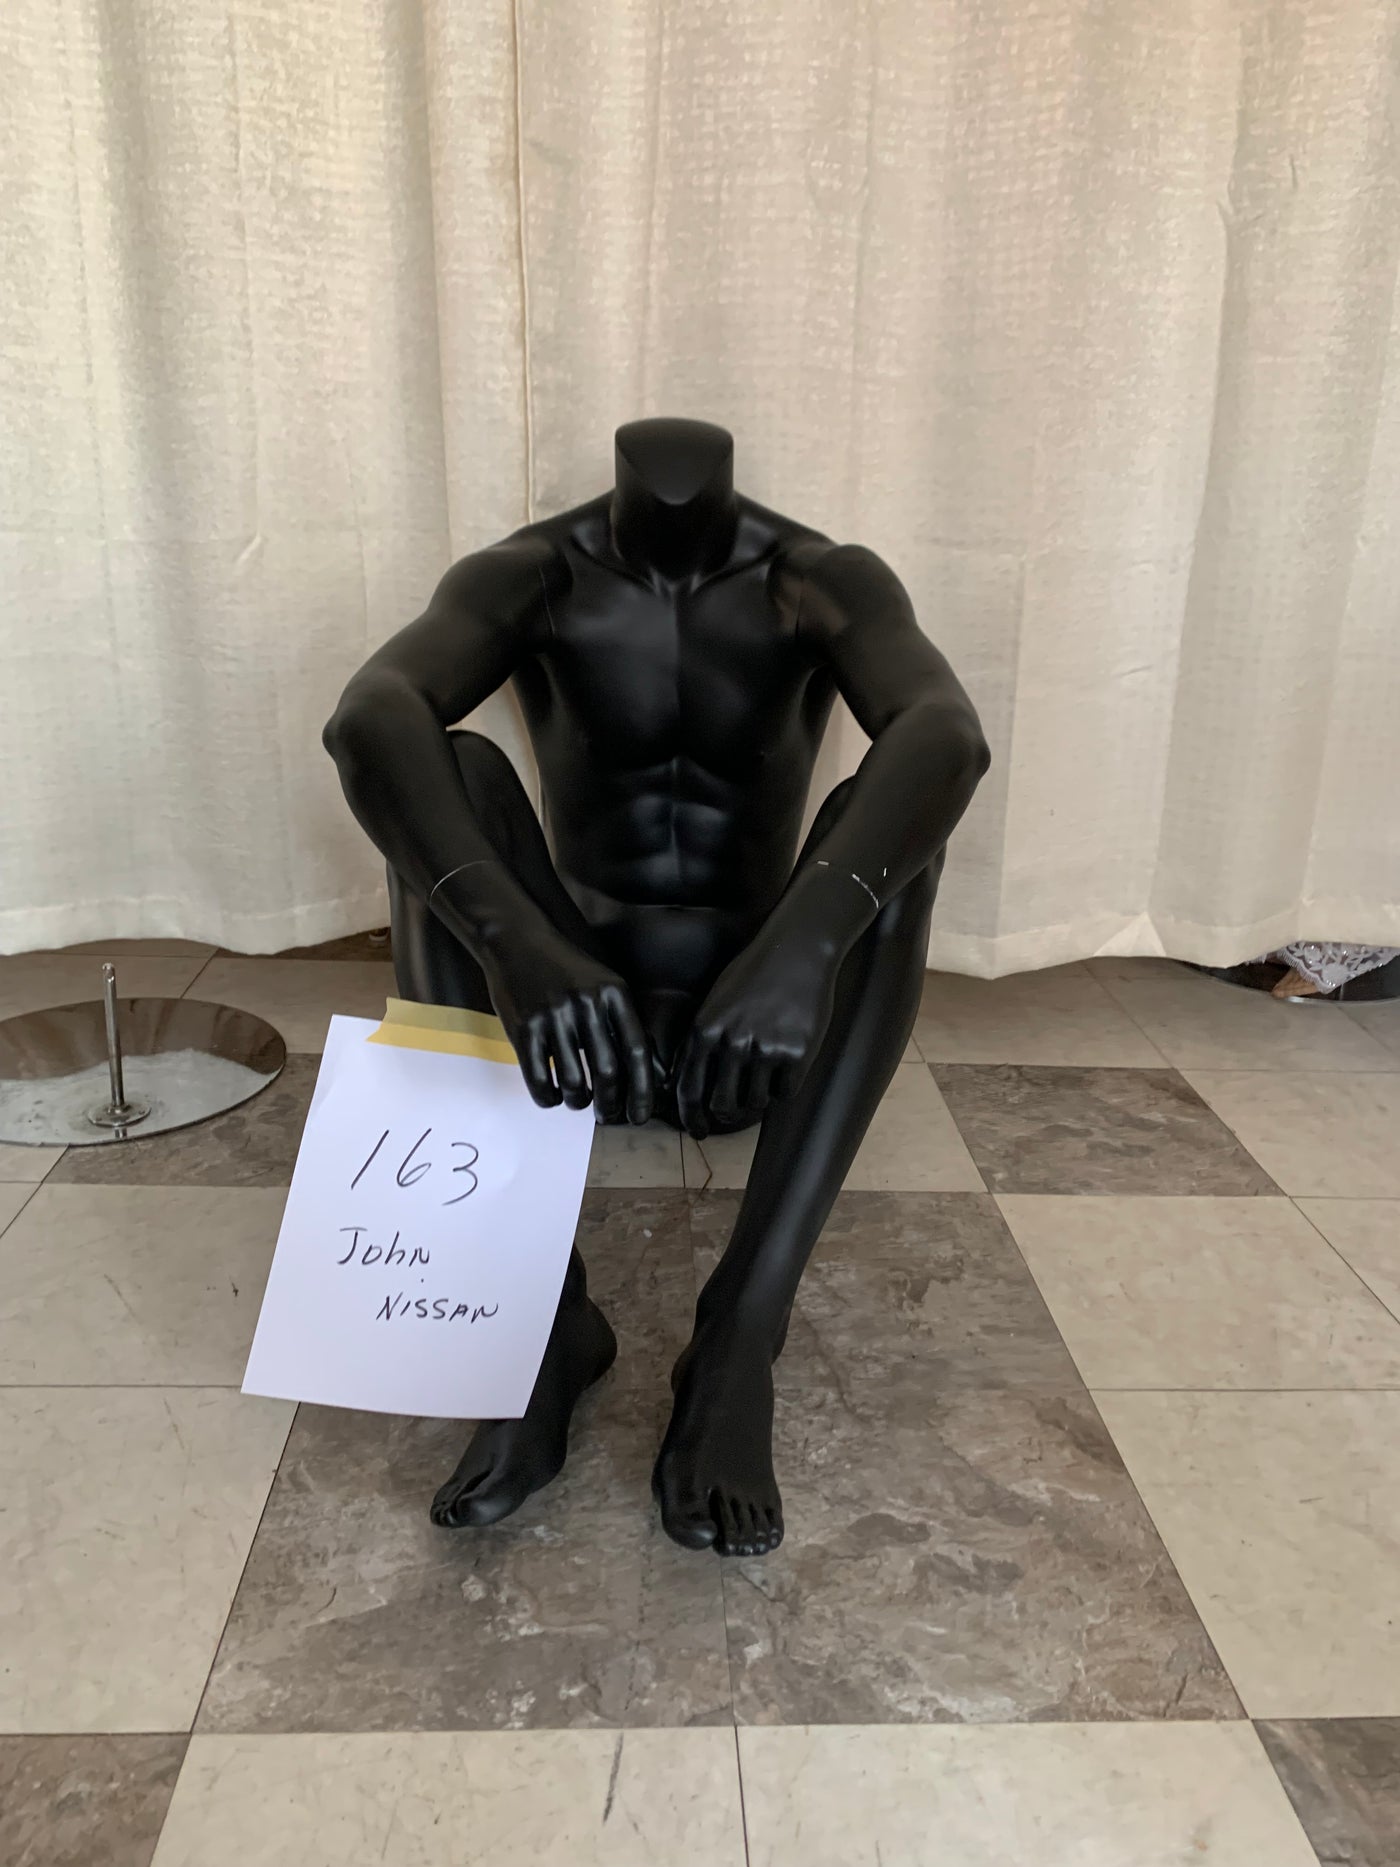 Used Seated Headless Male Mannequin - #50  Black Color